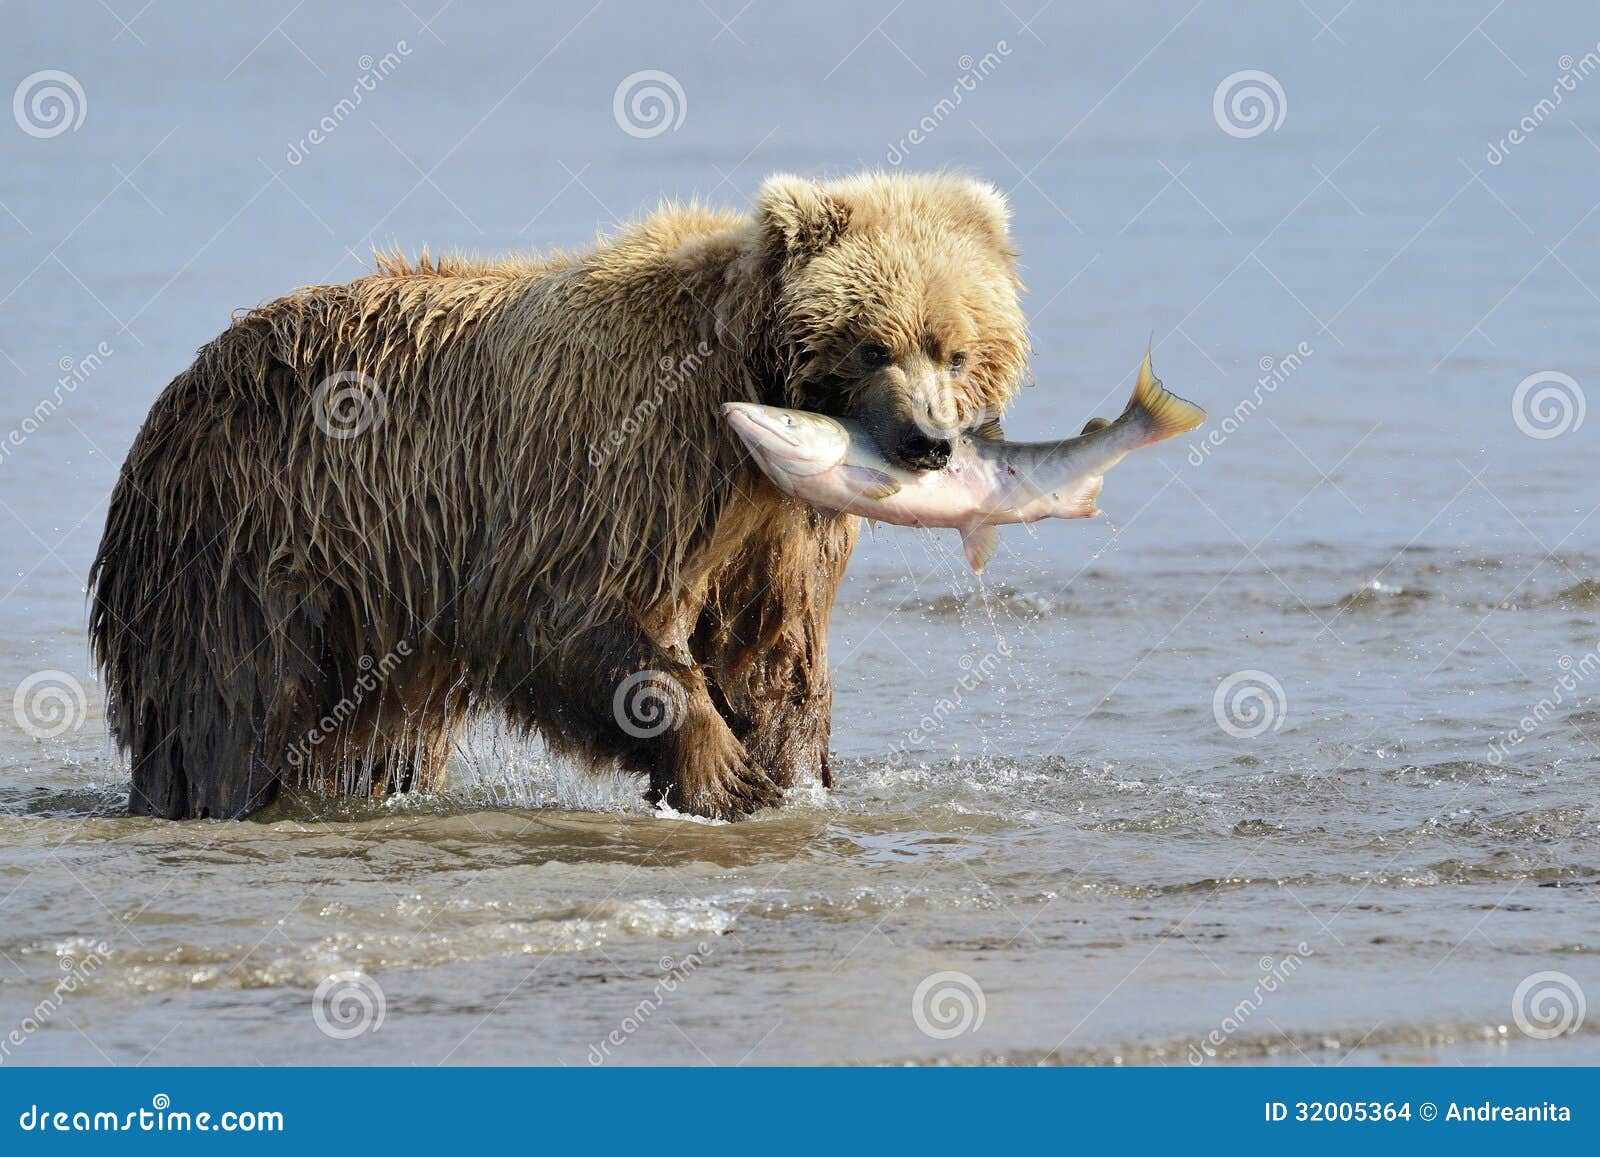 grizzly bear